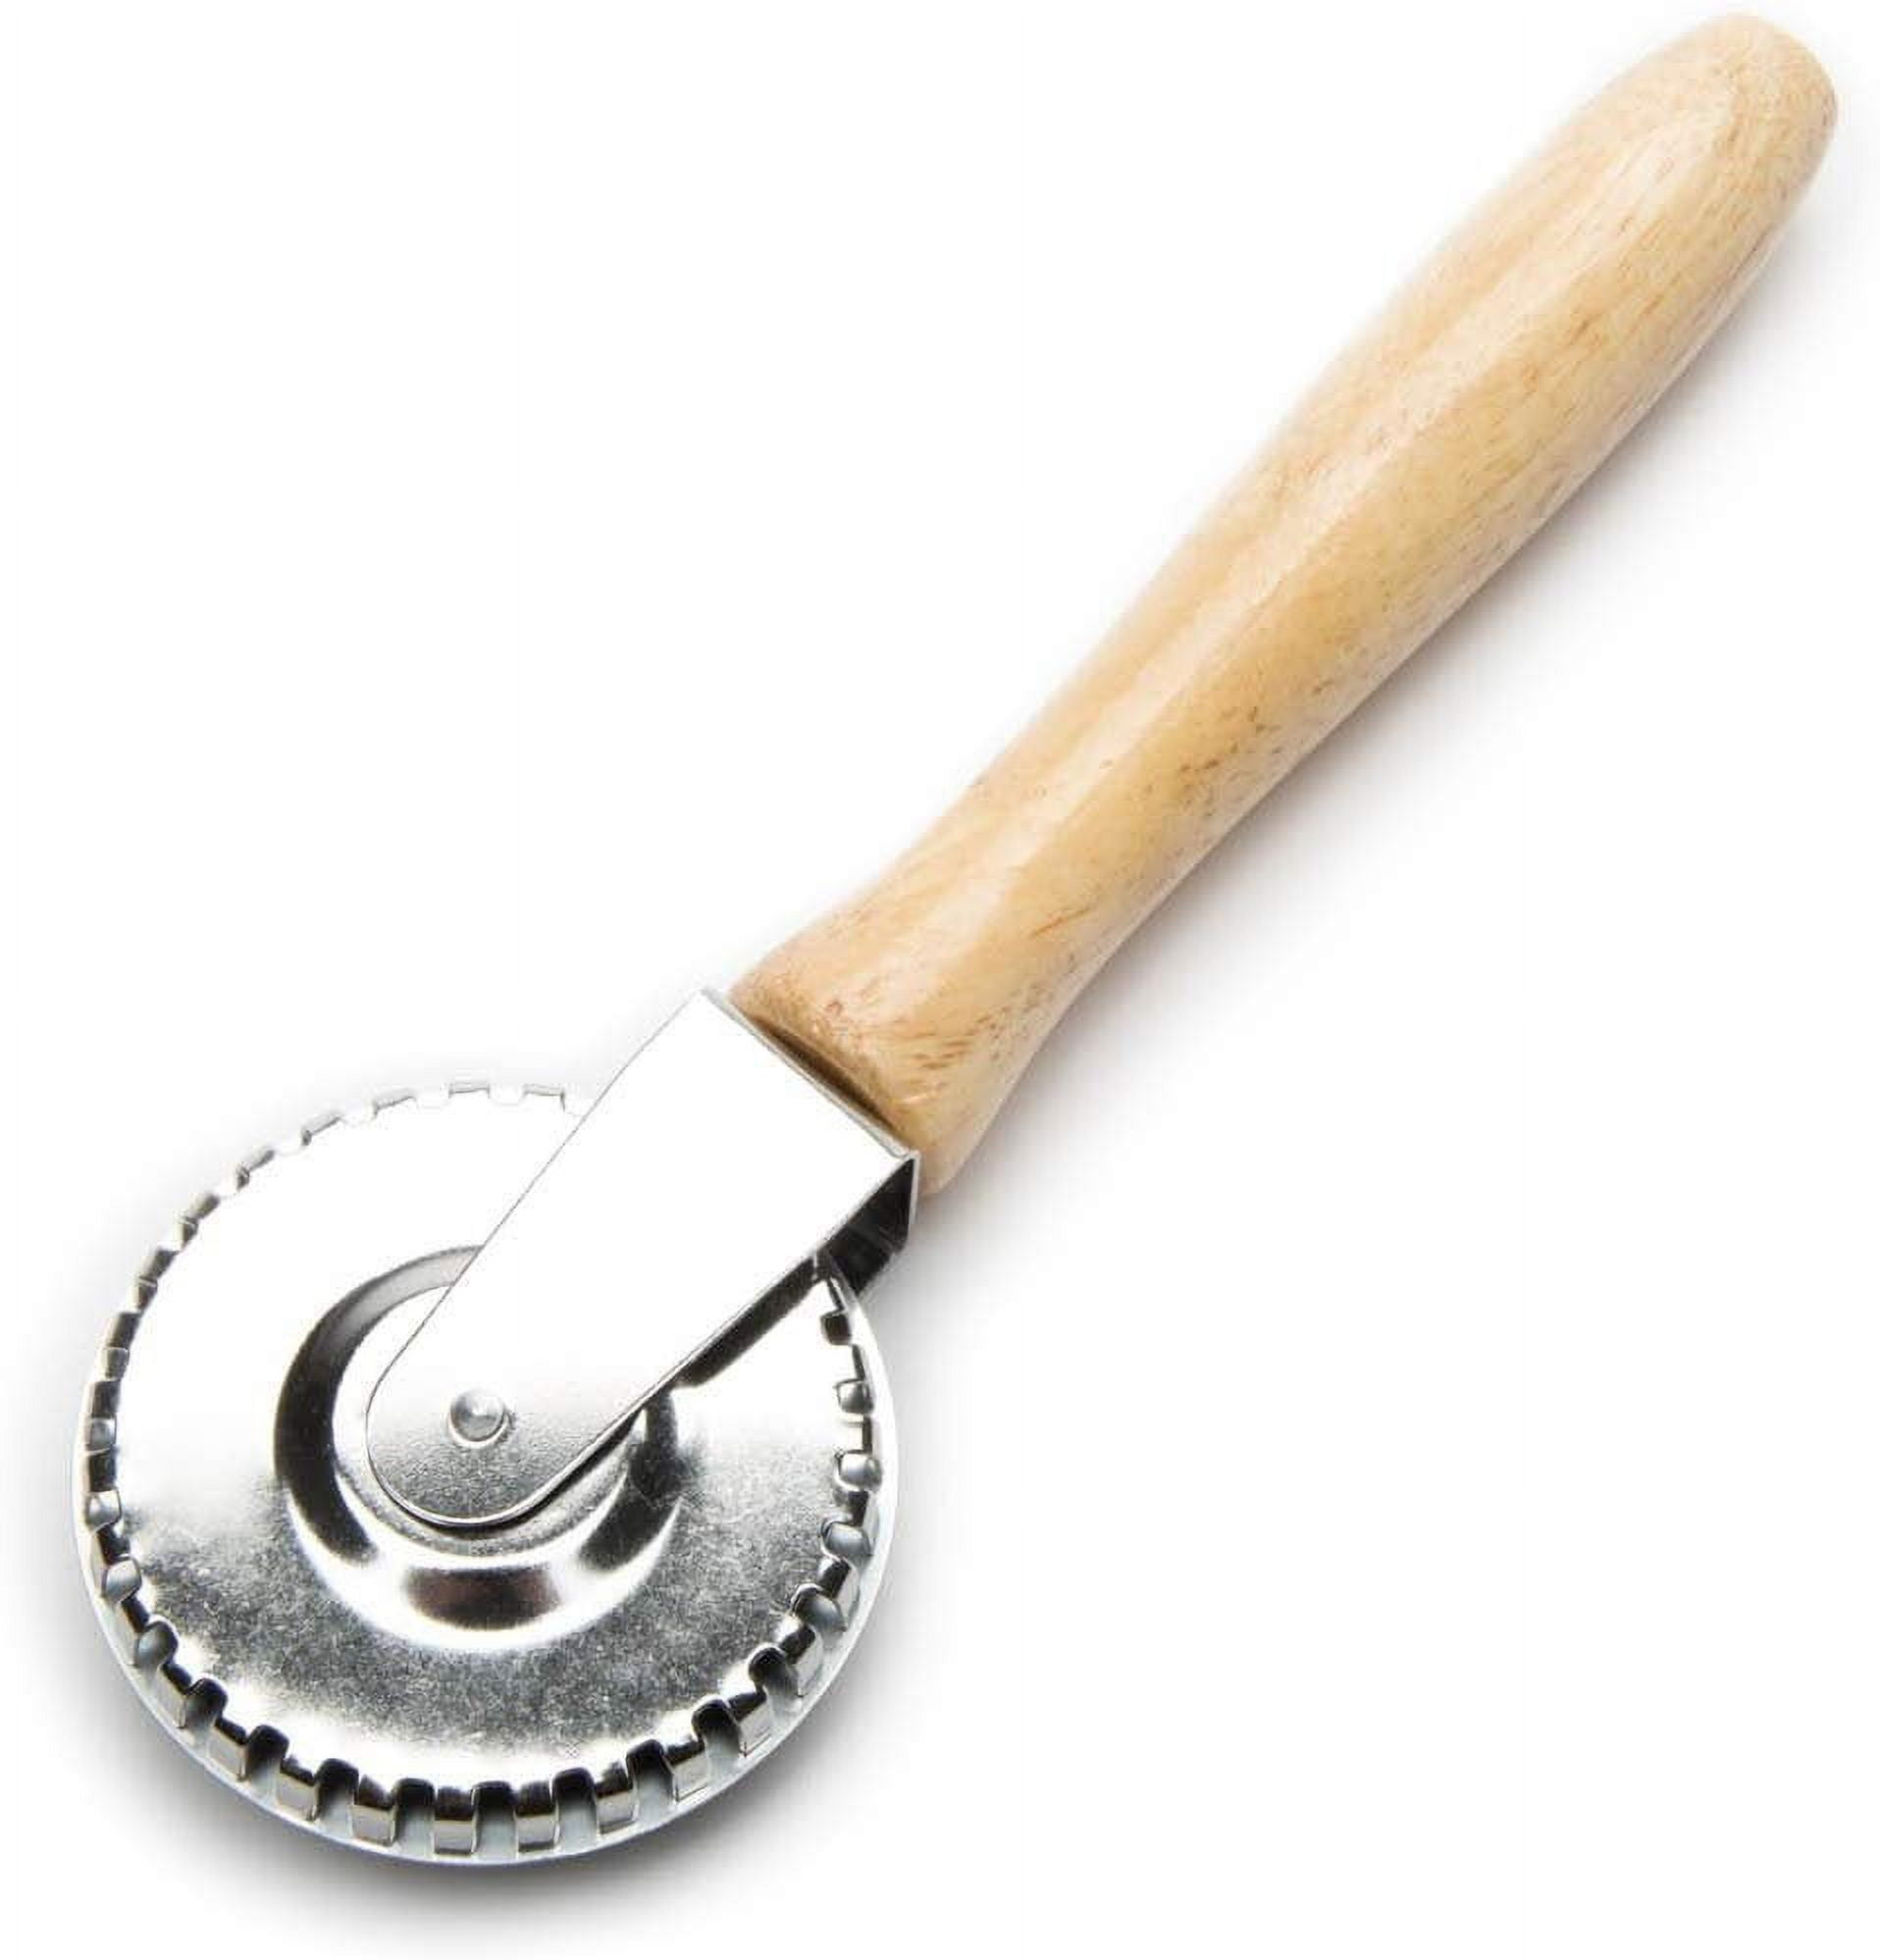 Fox Run 5 3/4 x 4 Stainless Steel Dough Cutter / Bench Scraper with  Measurements and Wood Handle